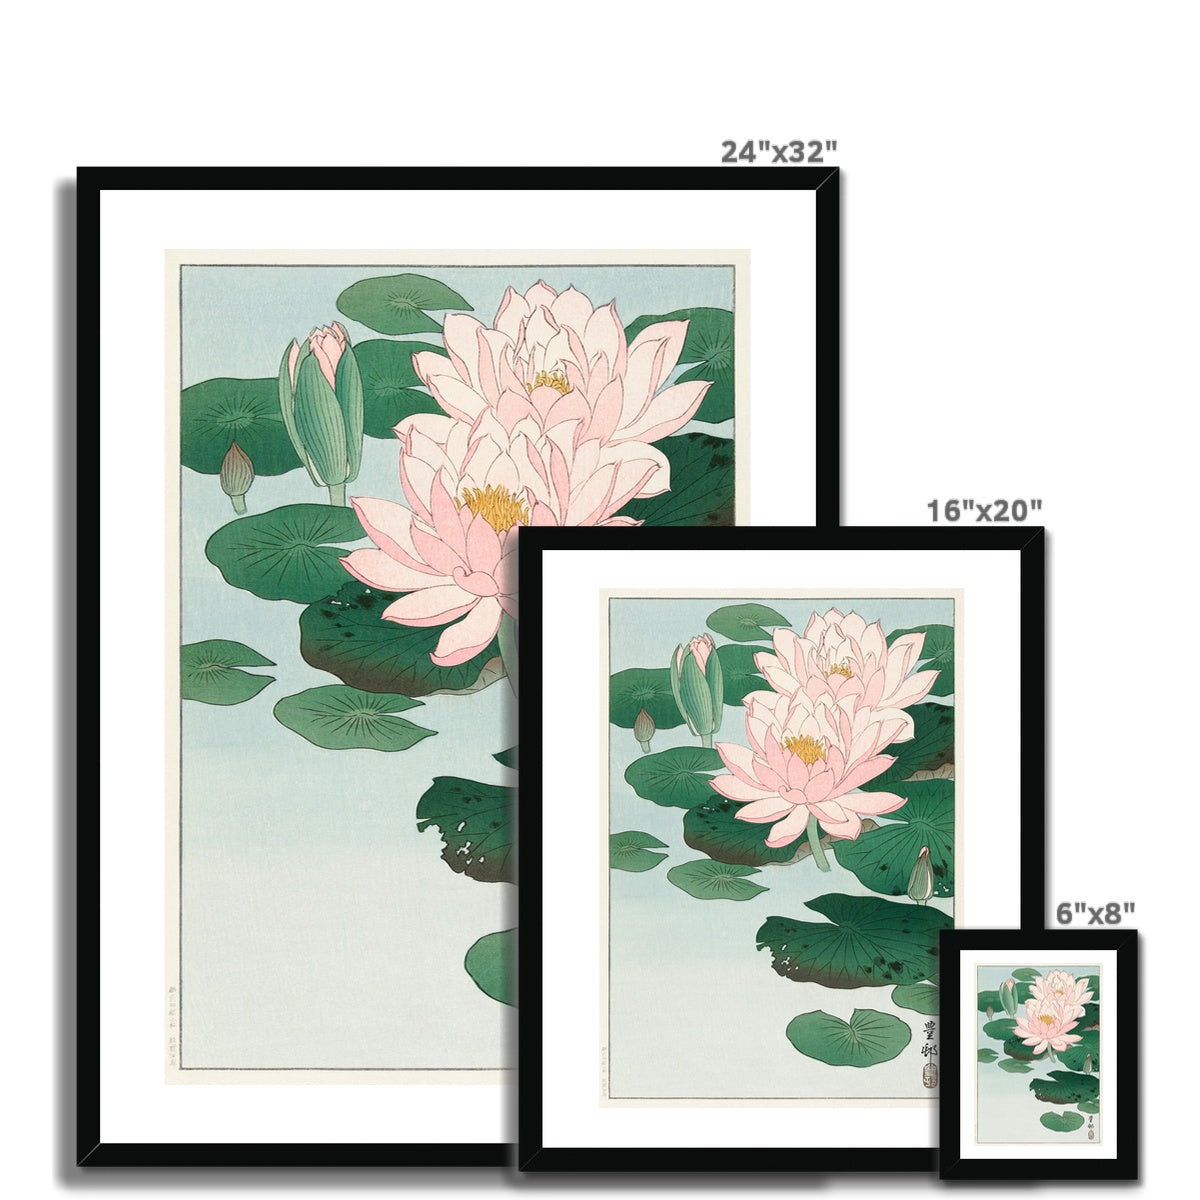 Koson - Water Lily gerahmtes Poster - Atopurinto